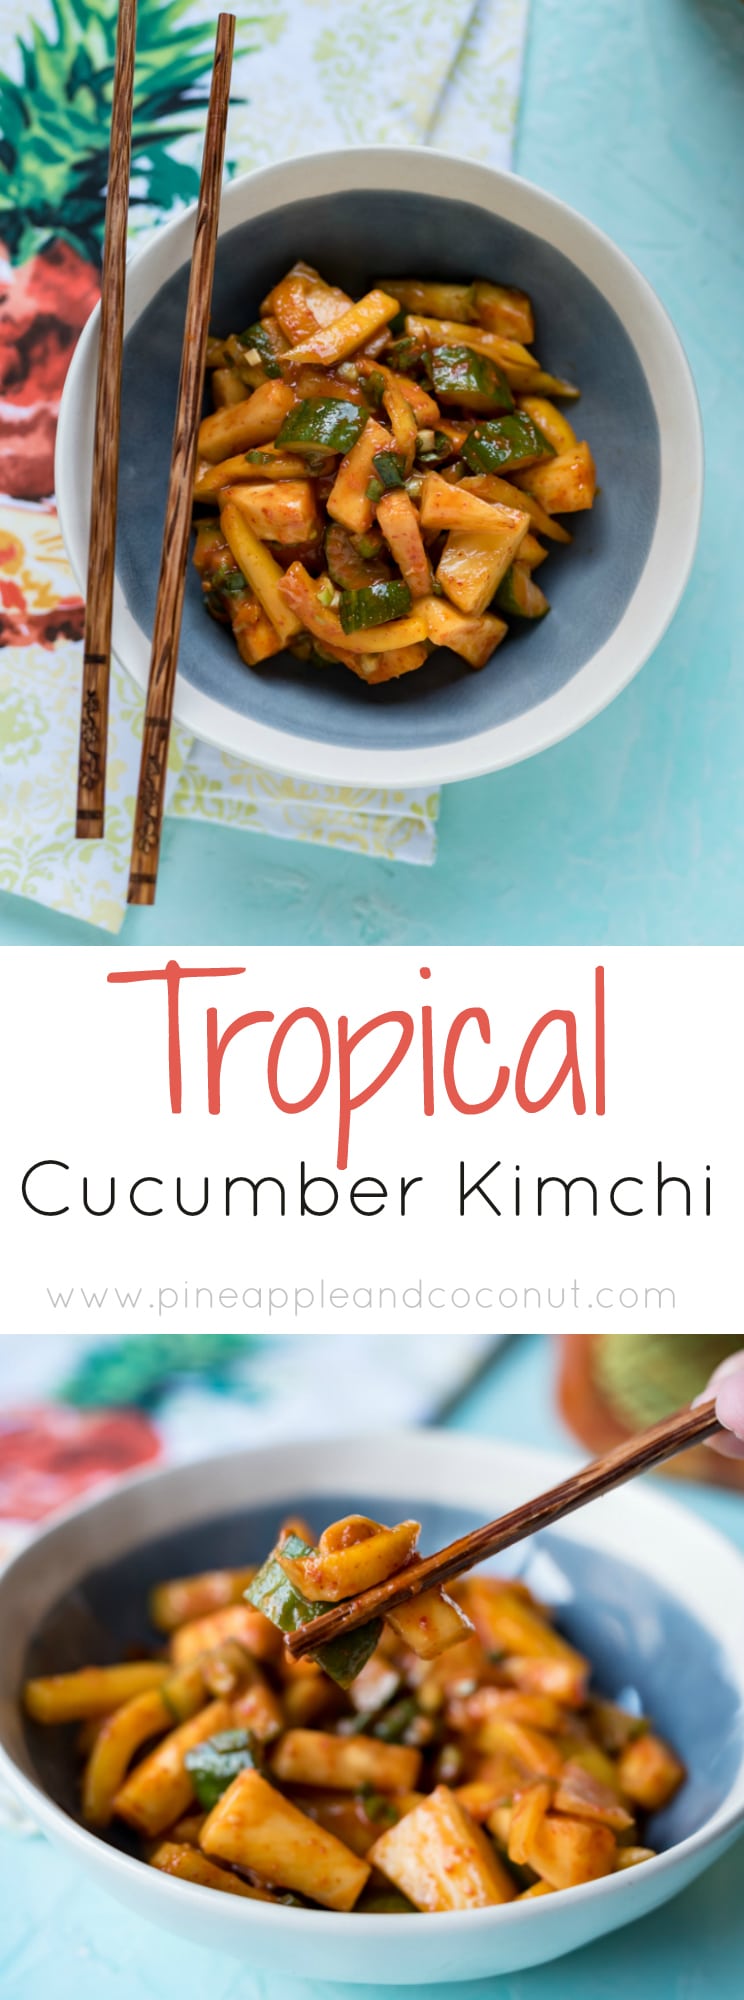 Tropical Cucumber Kimchi with Mango and Pineapple www.pineappleandcoconut.com